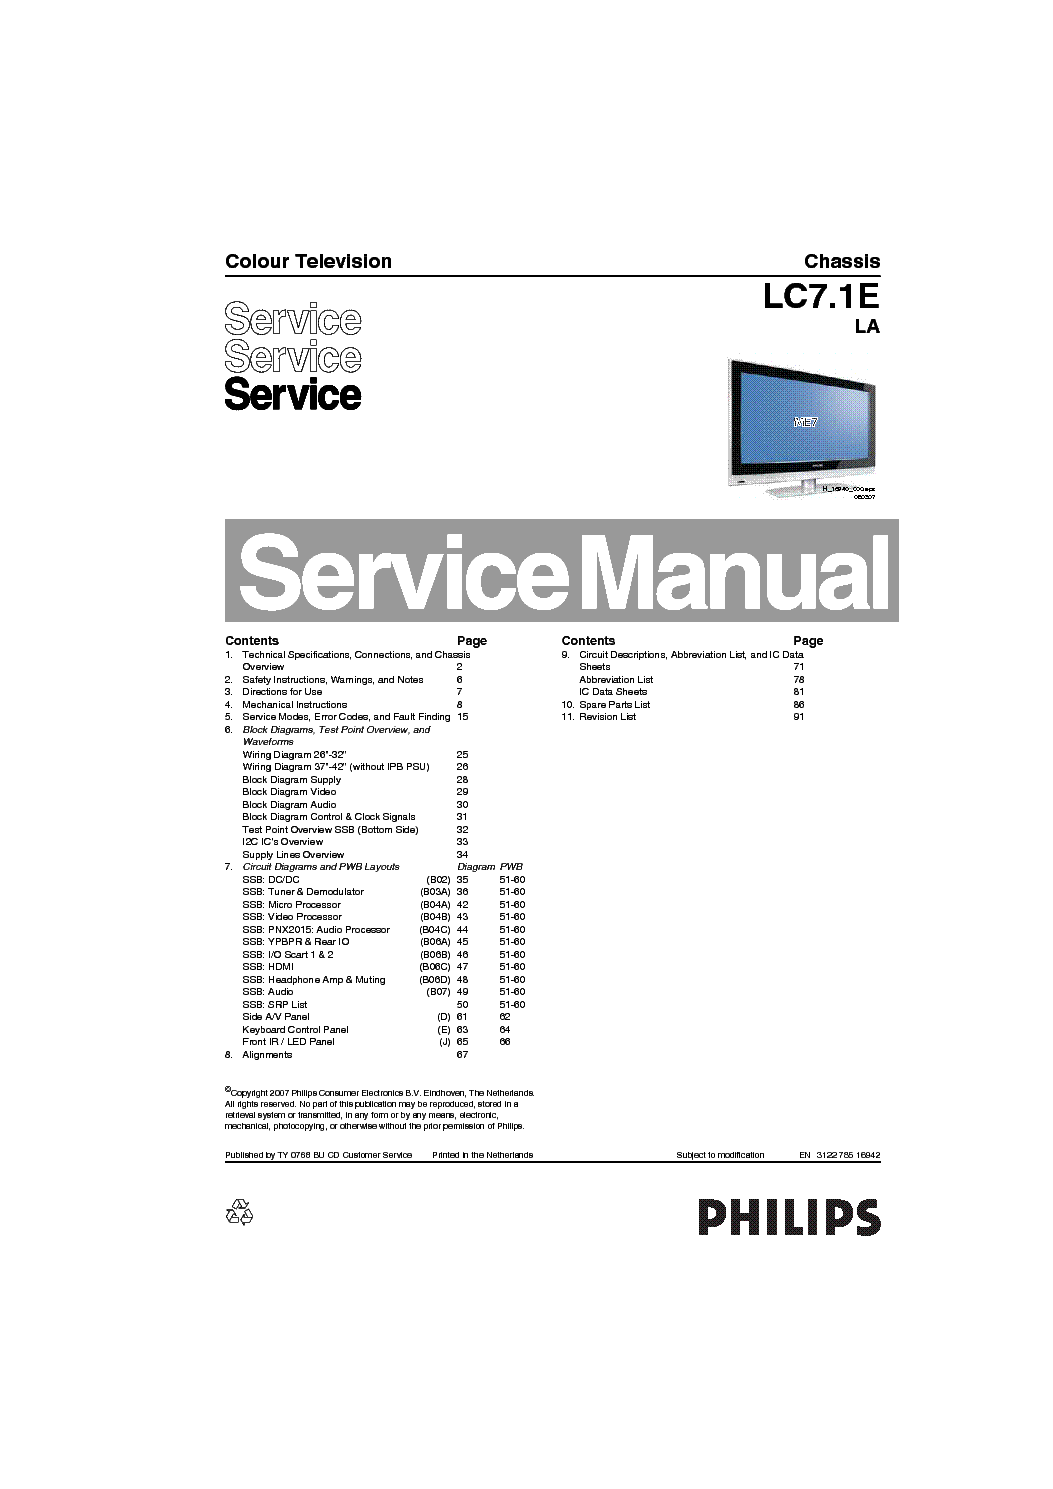 PHILIPS 26 32 37 42PFL3312 10 CHASSIS LC7.1E service manual (1st page)